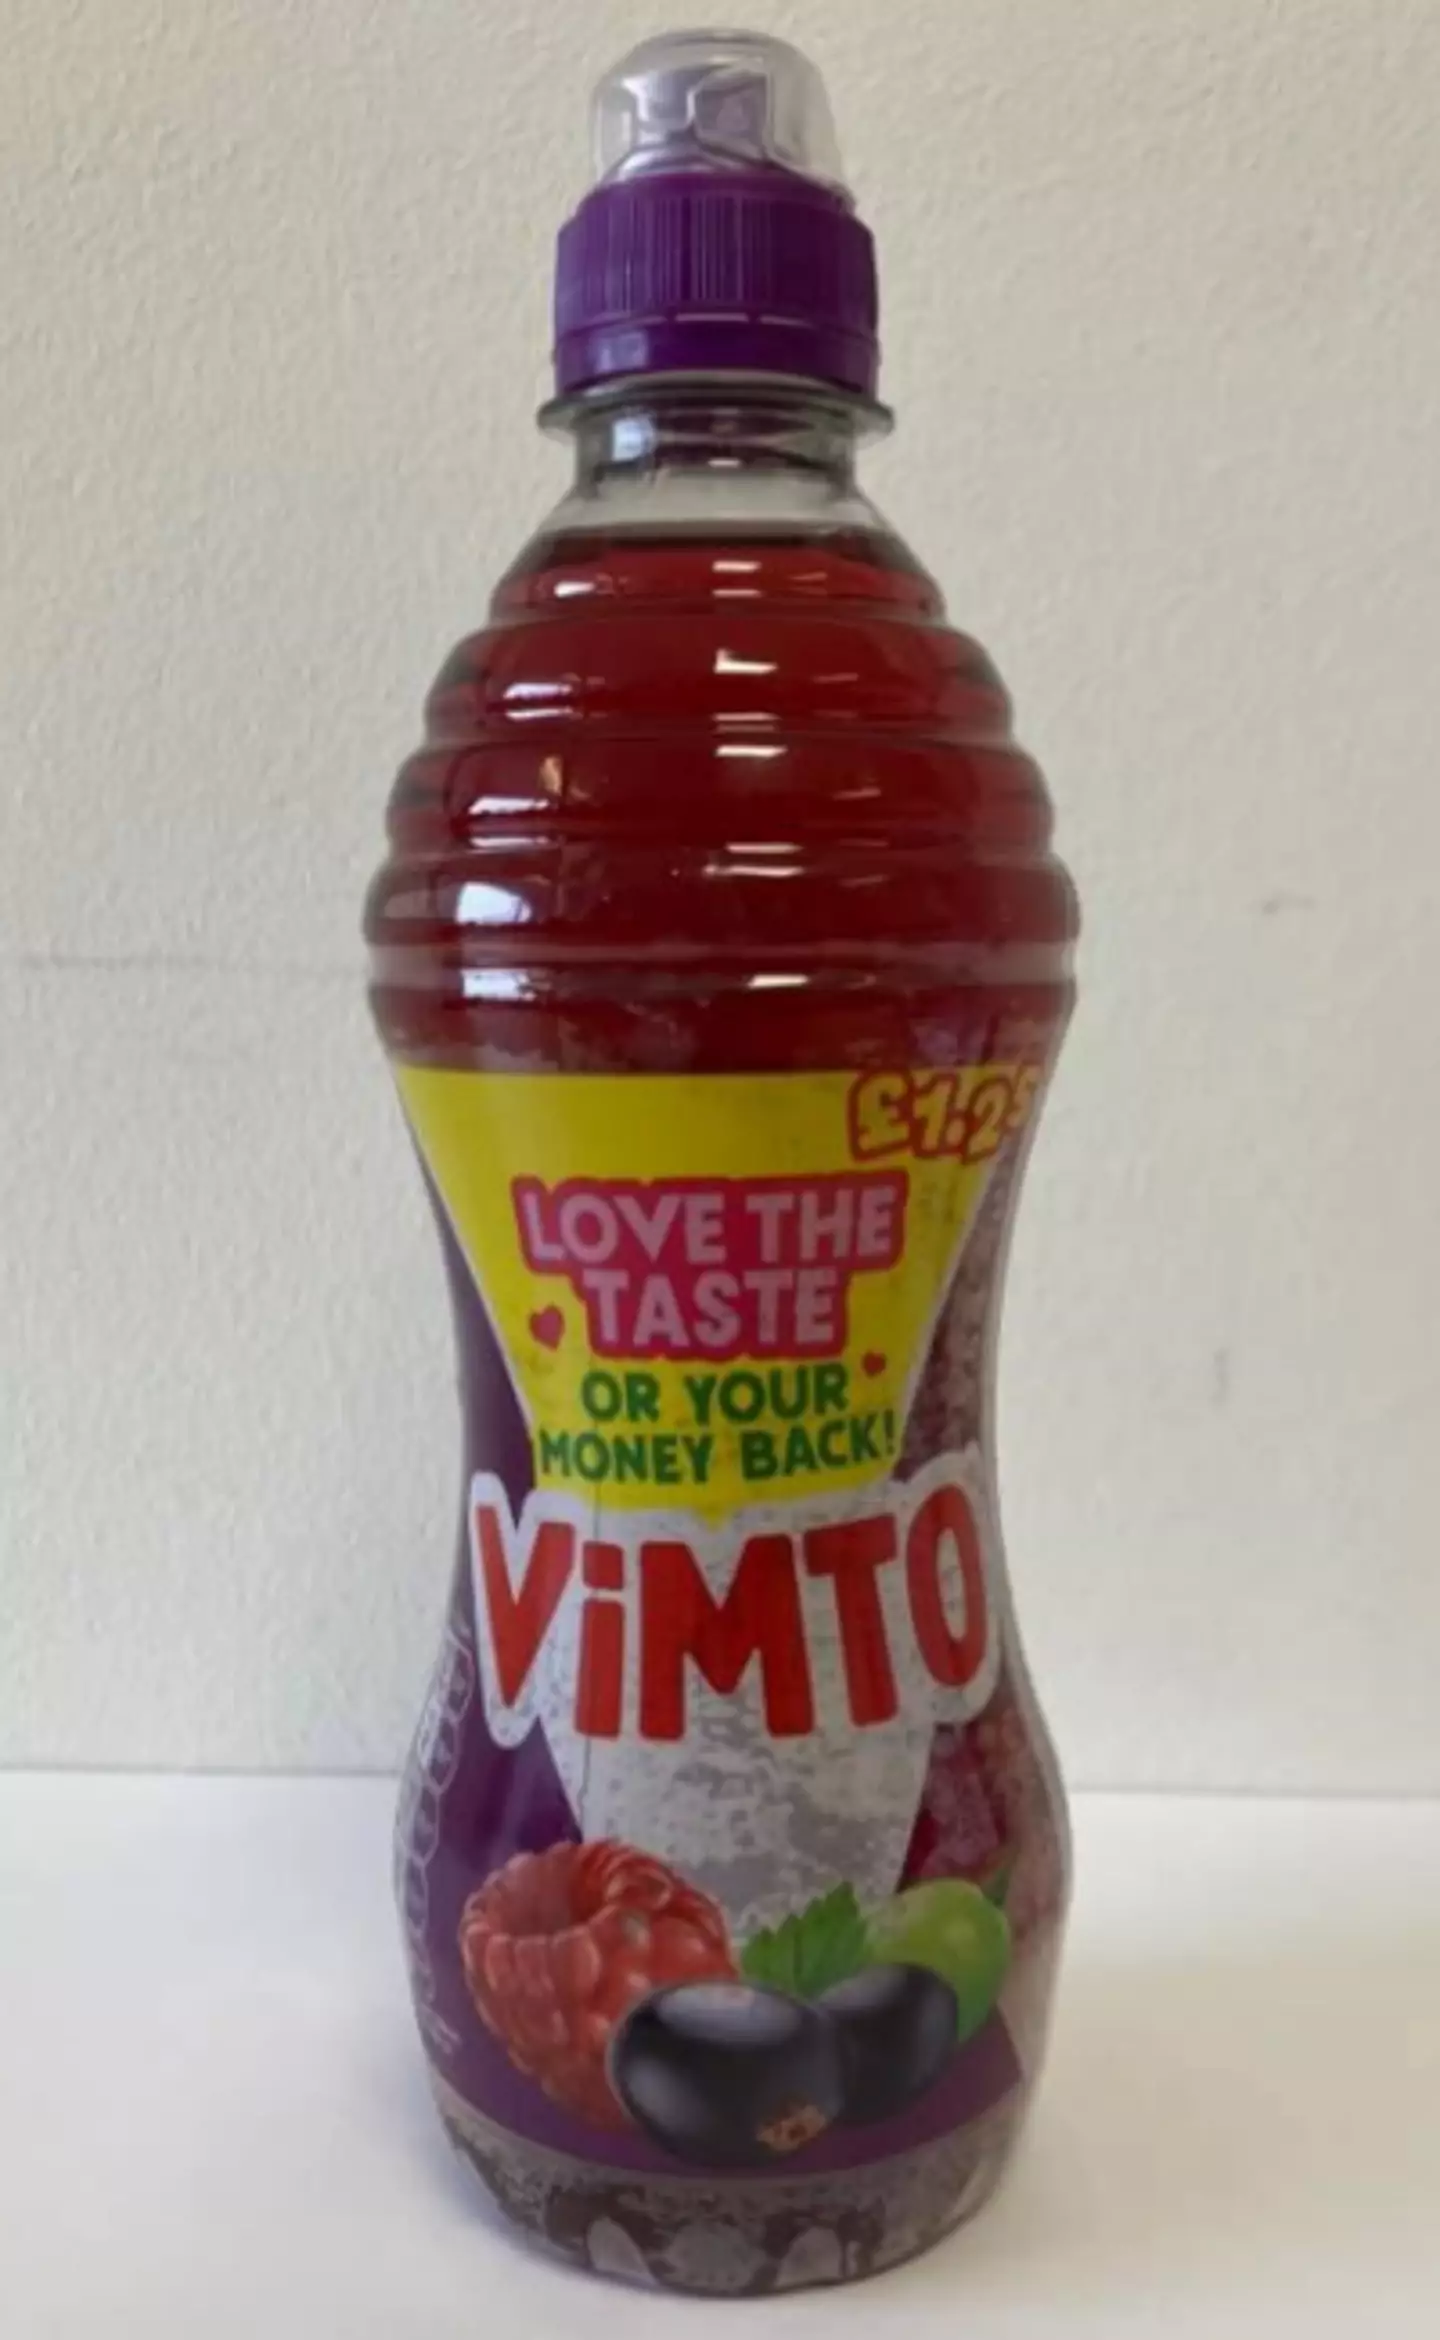 Certain batches of Vimto are affected.